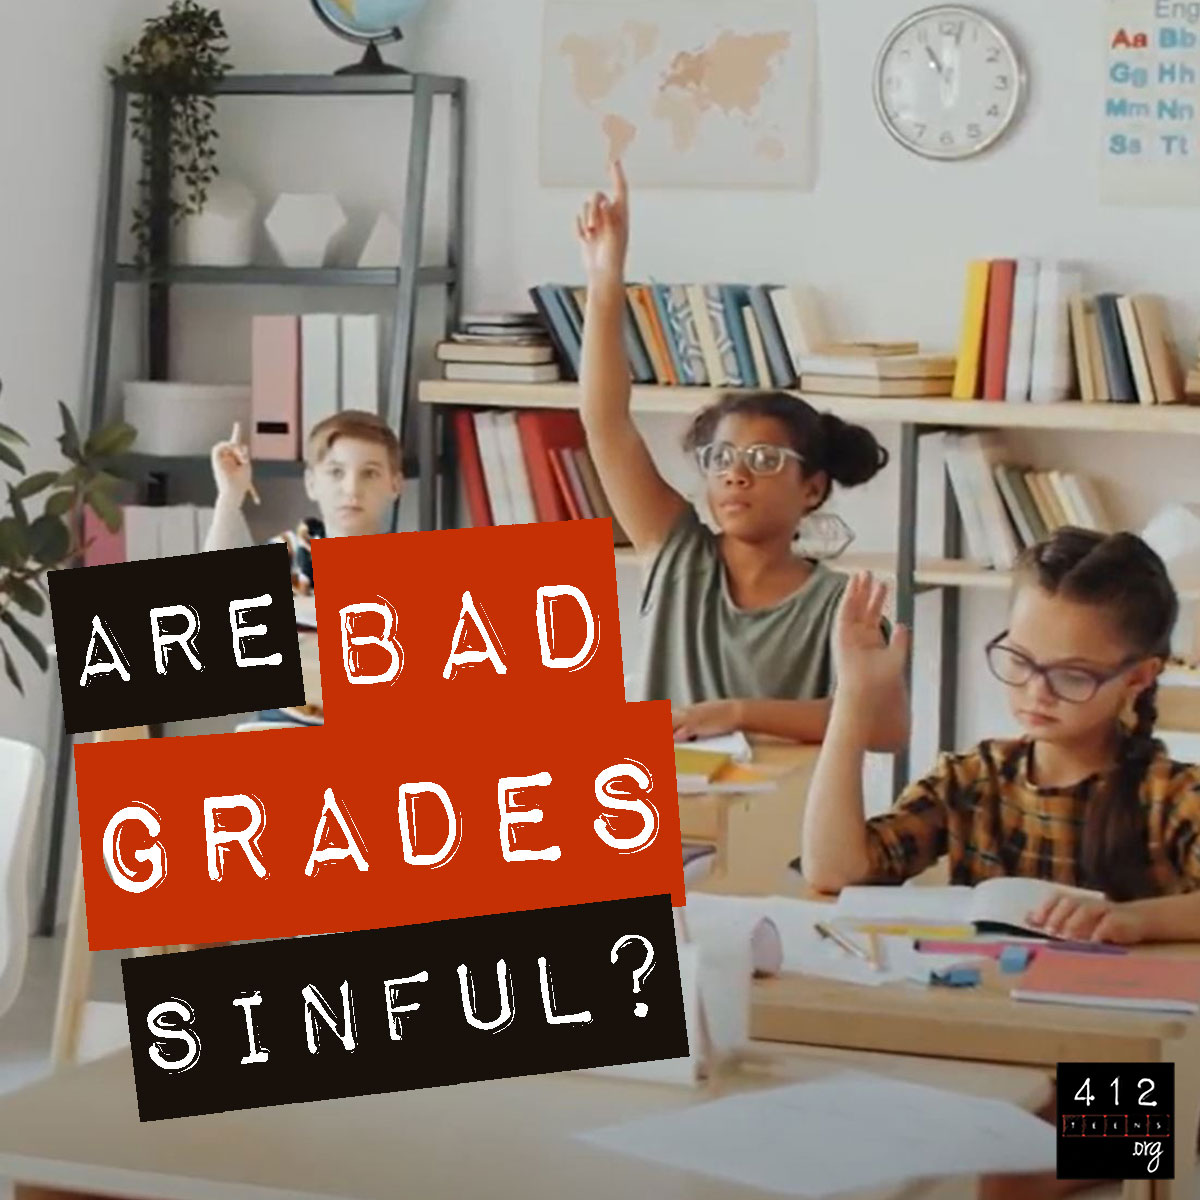 Is it sinful to get bad grades? | 412teens.org